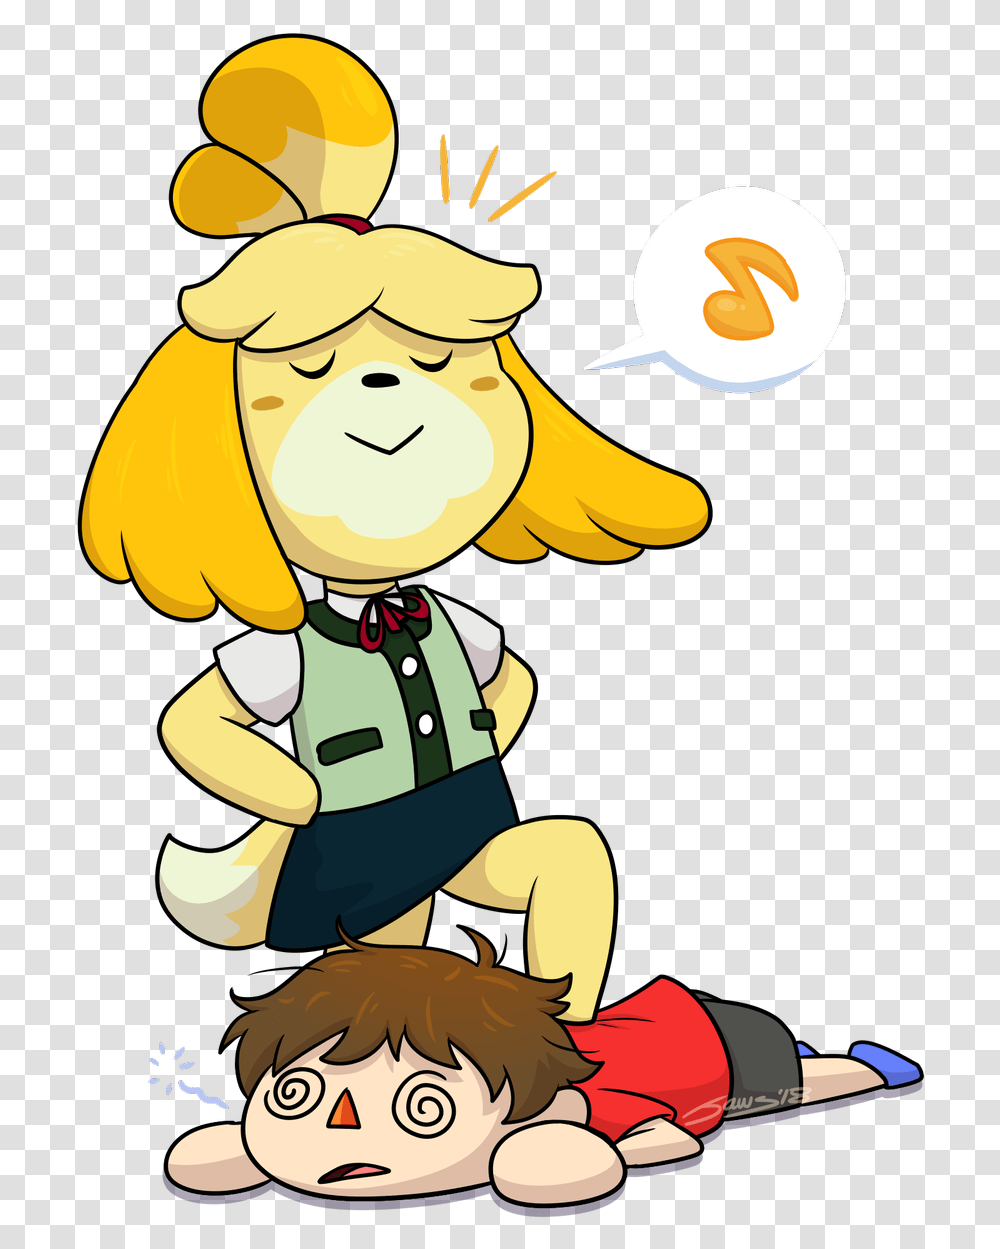 Animal Crossing Isabelle And Villager Transparent Png